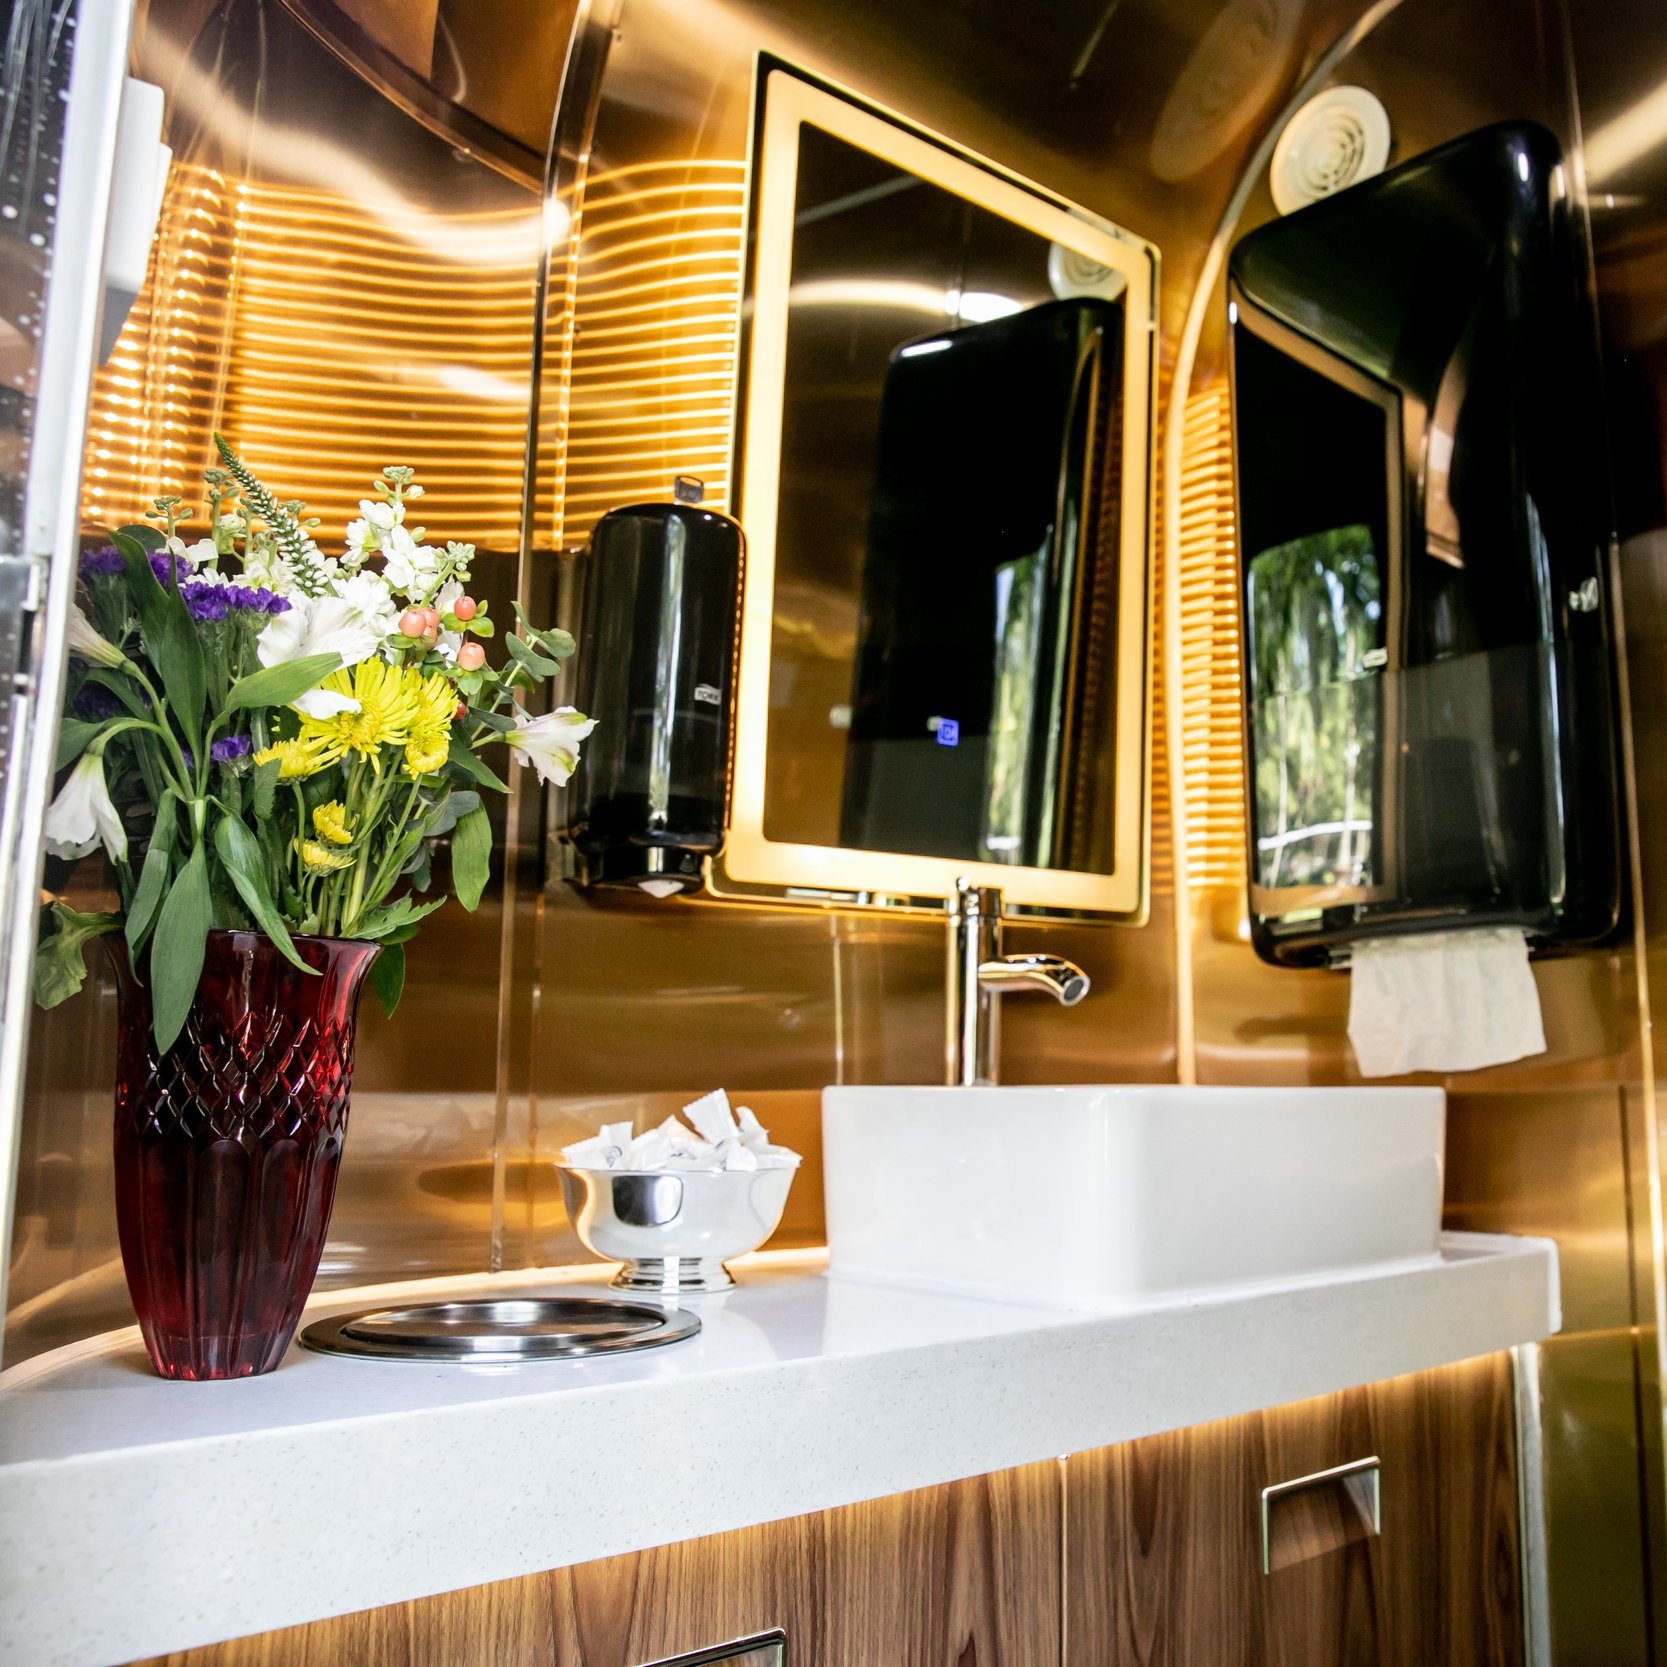 Gorgeous+Gold+Interior+on+Restrooms+for+Events.jpg